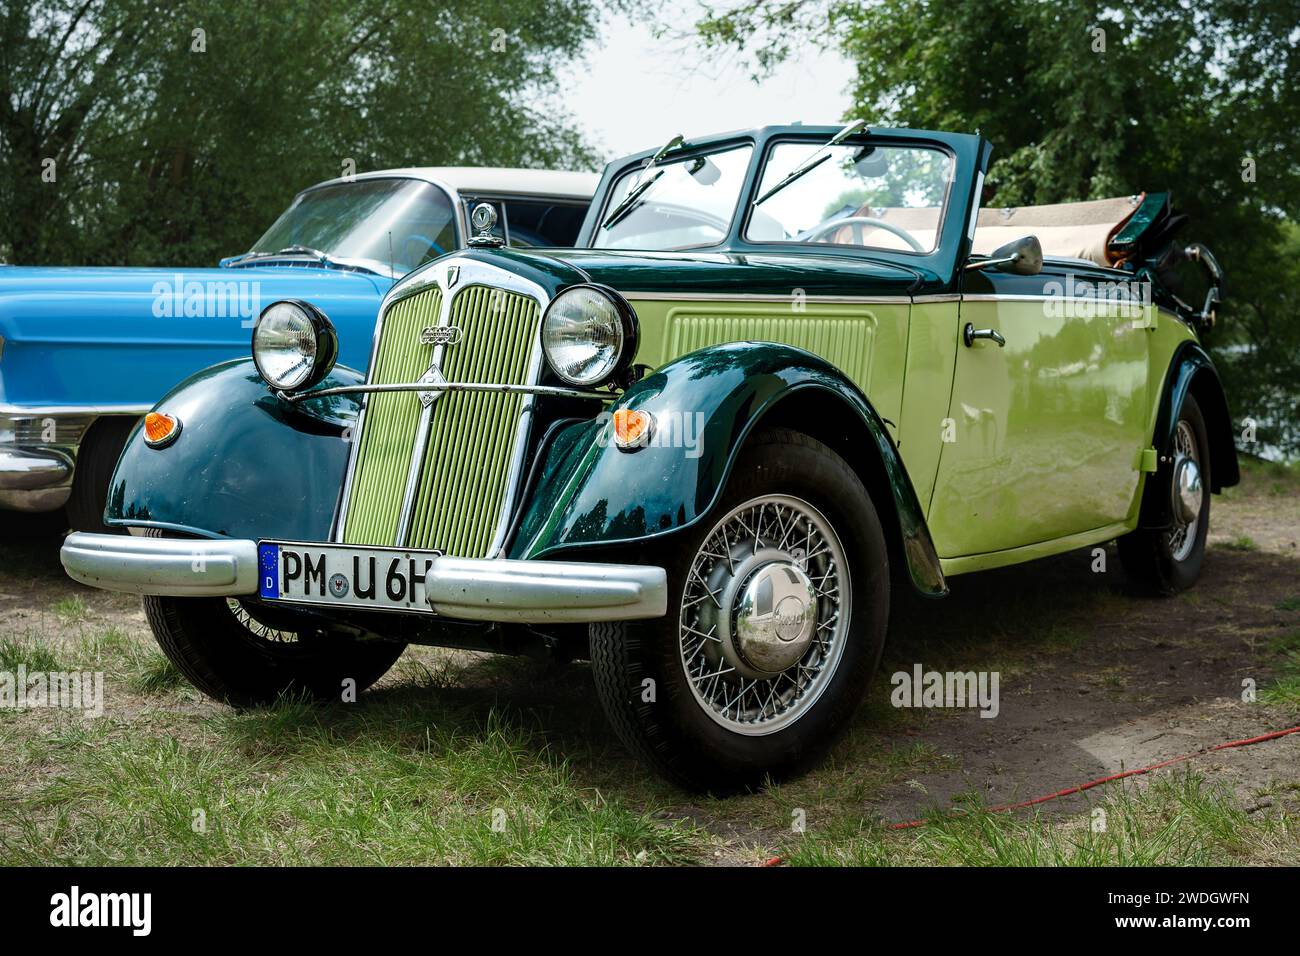 WERDER (HAVEL), GERMANY - MAY 20, 2023: The small family car DKW F8. Oldtimer - Festival Werder Classics 2023 Stock Photo